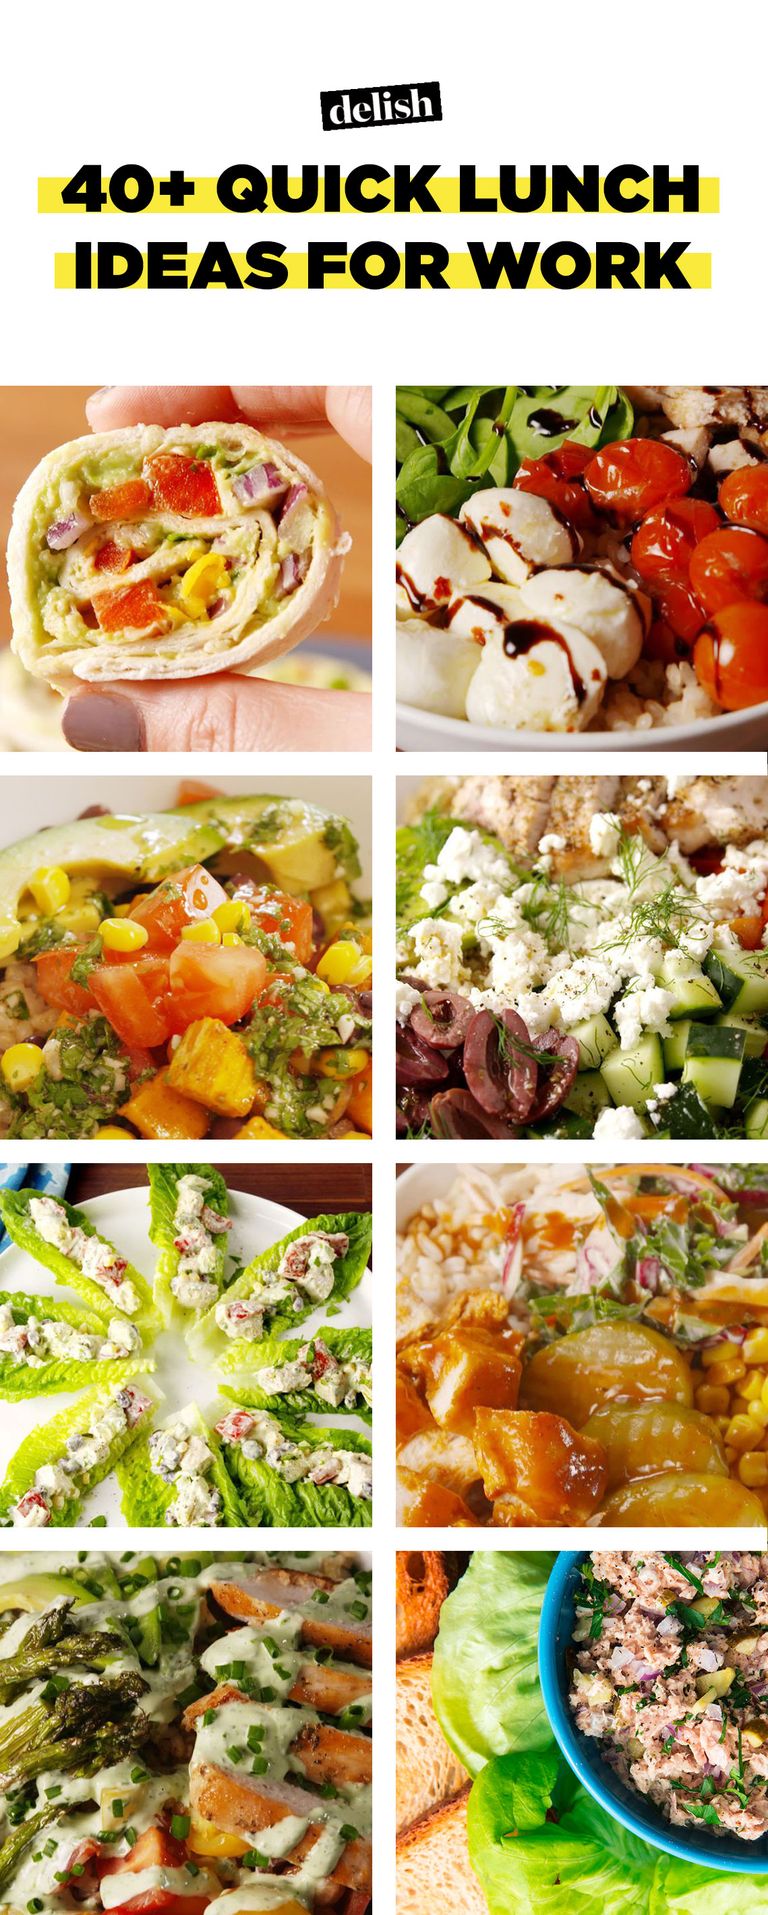 40+ Quick Lunch Ideas for Work – Recipes for Fast Work Lunches – Delish.com